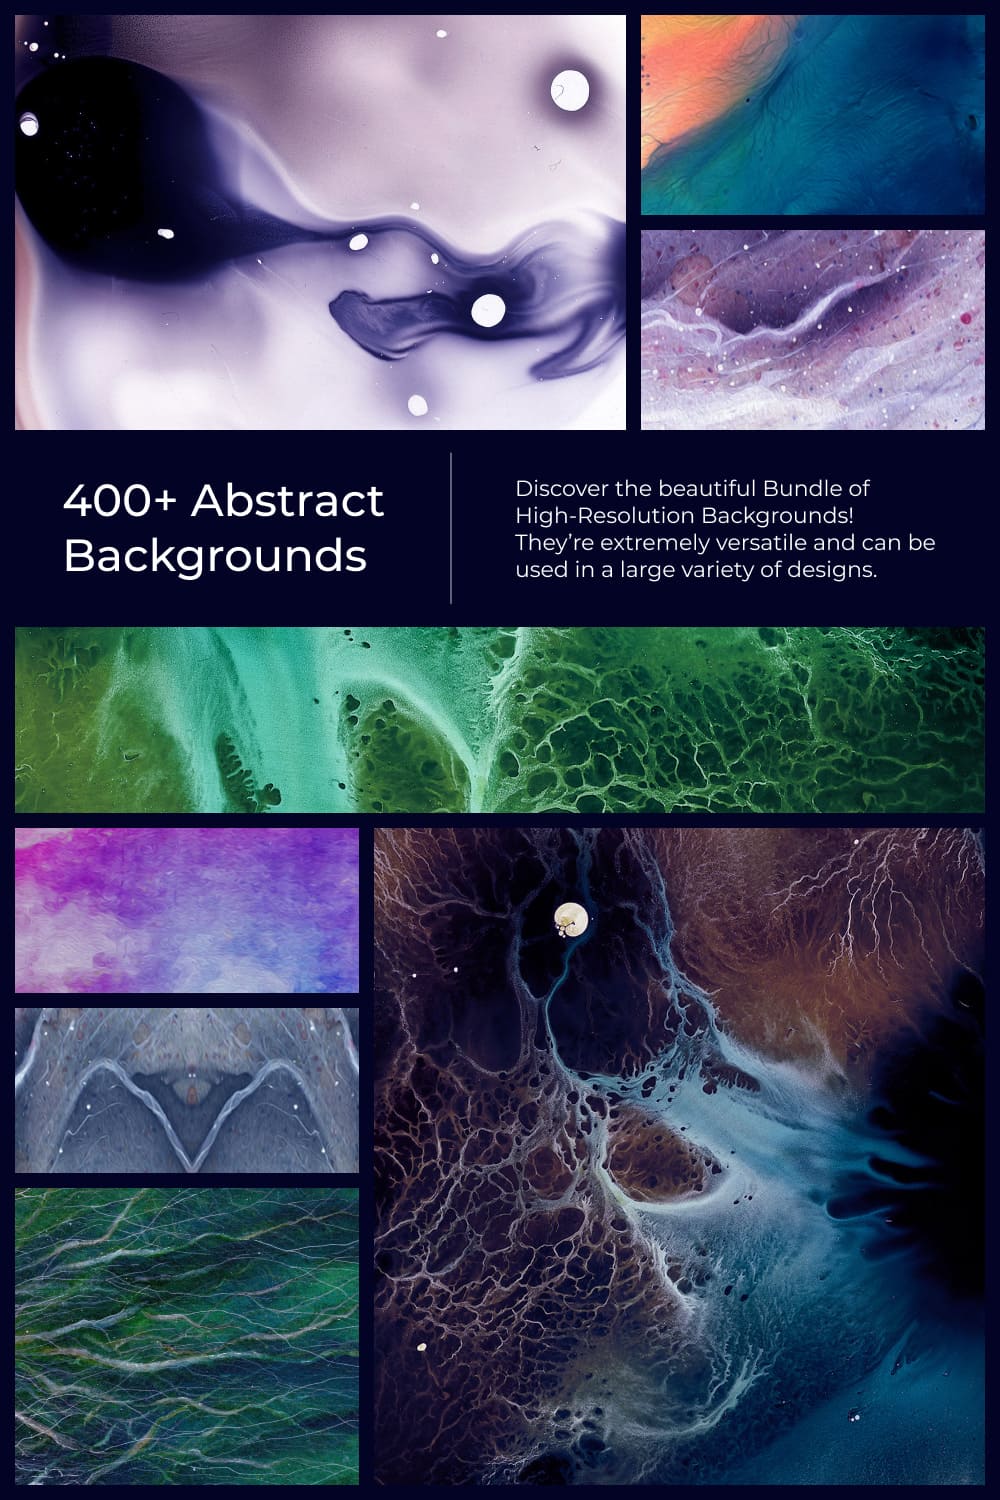  Abstract Backgrounds Pinterest.